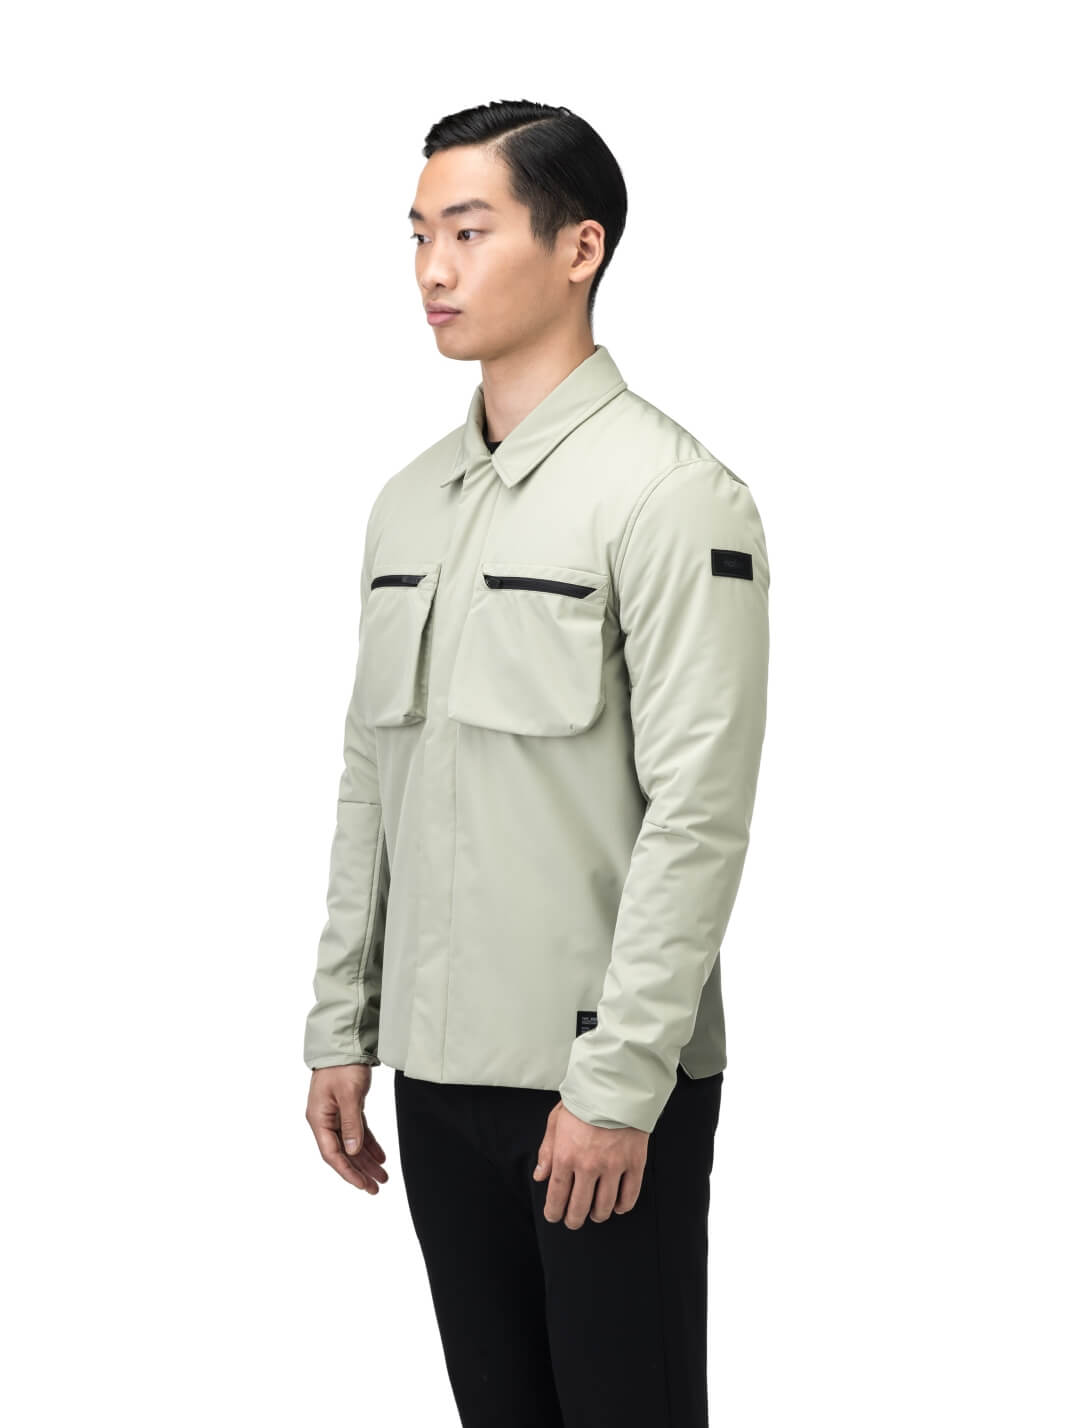 Ander Men's Mid Layer Shirt in hip length, PrimaLoft Gold Insulation Active+, 3-Ply Micro Denier front and 4-Way Durable Stretch Weave back, zipper chest pockets, snap button wind flap, and snap button cuffs, in Tea/Clover